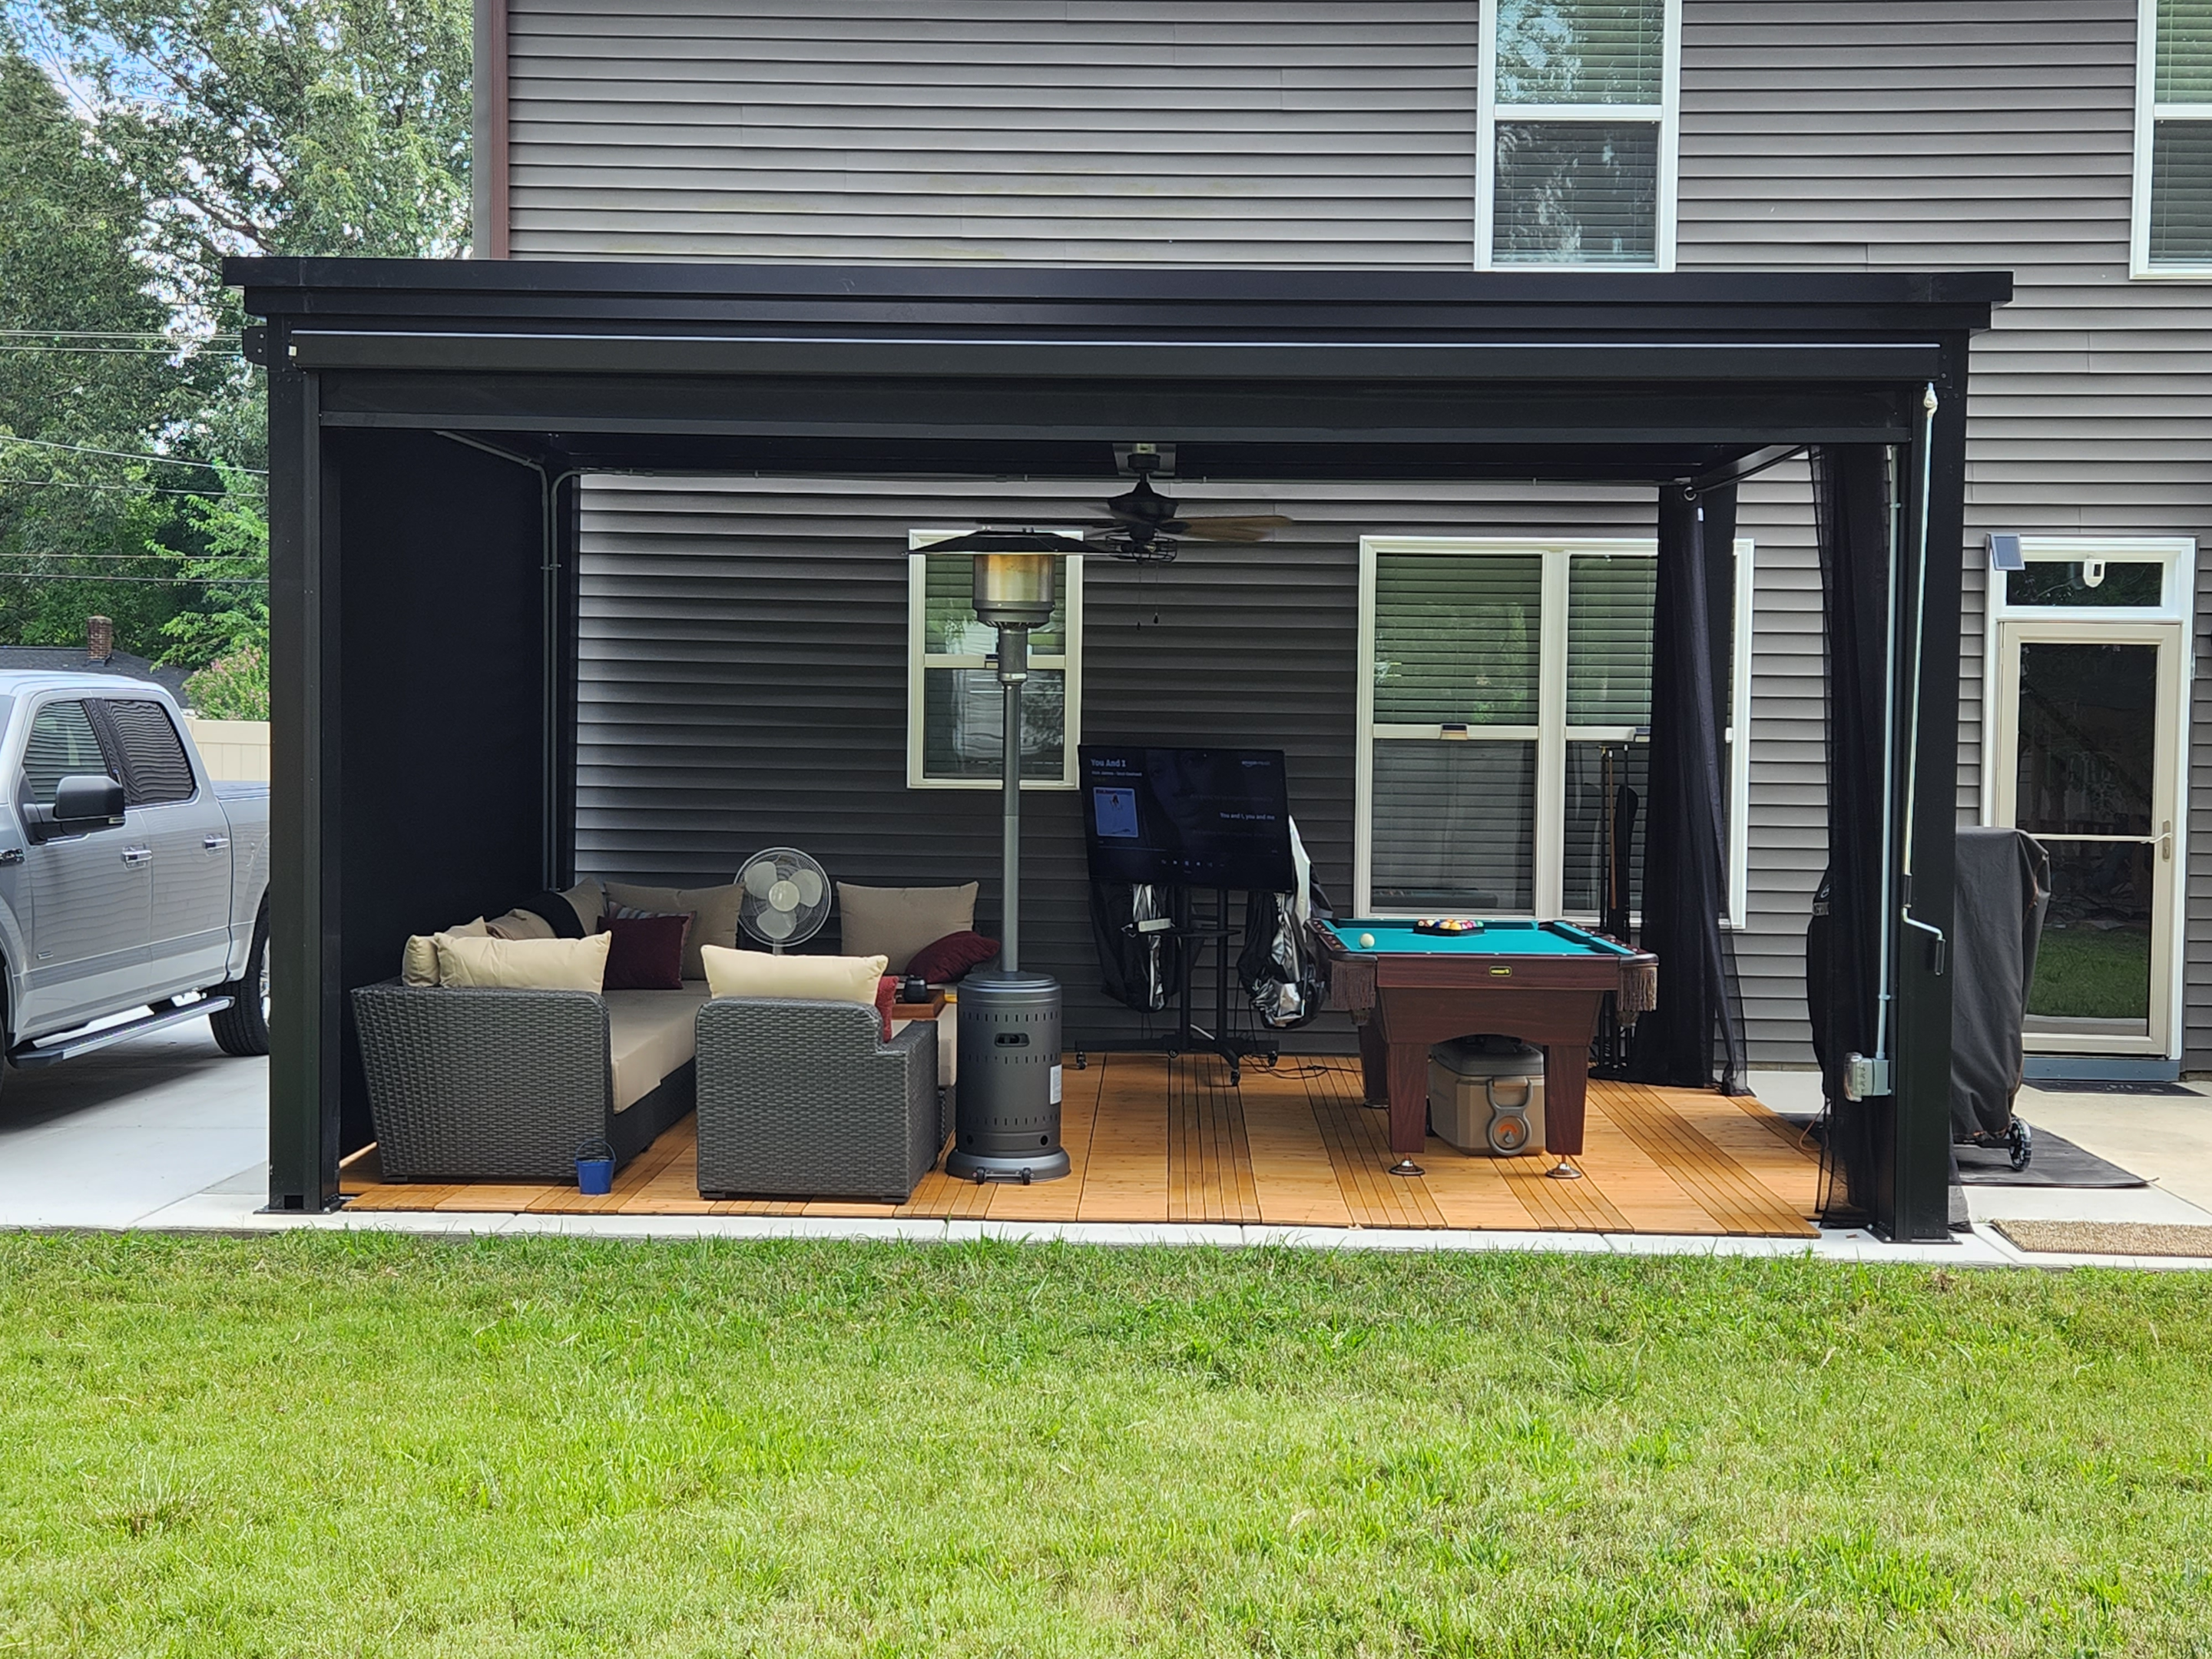 great home improvement project giving you a living space in the outdoors and the pergola add shade to the space